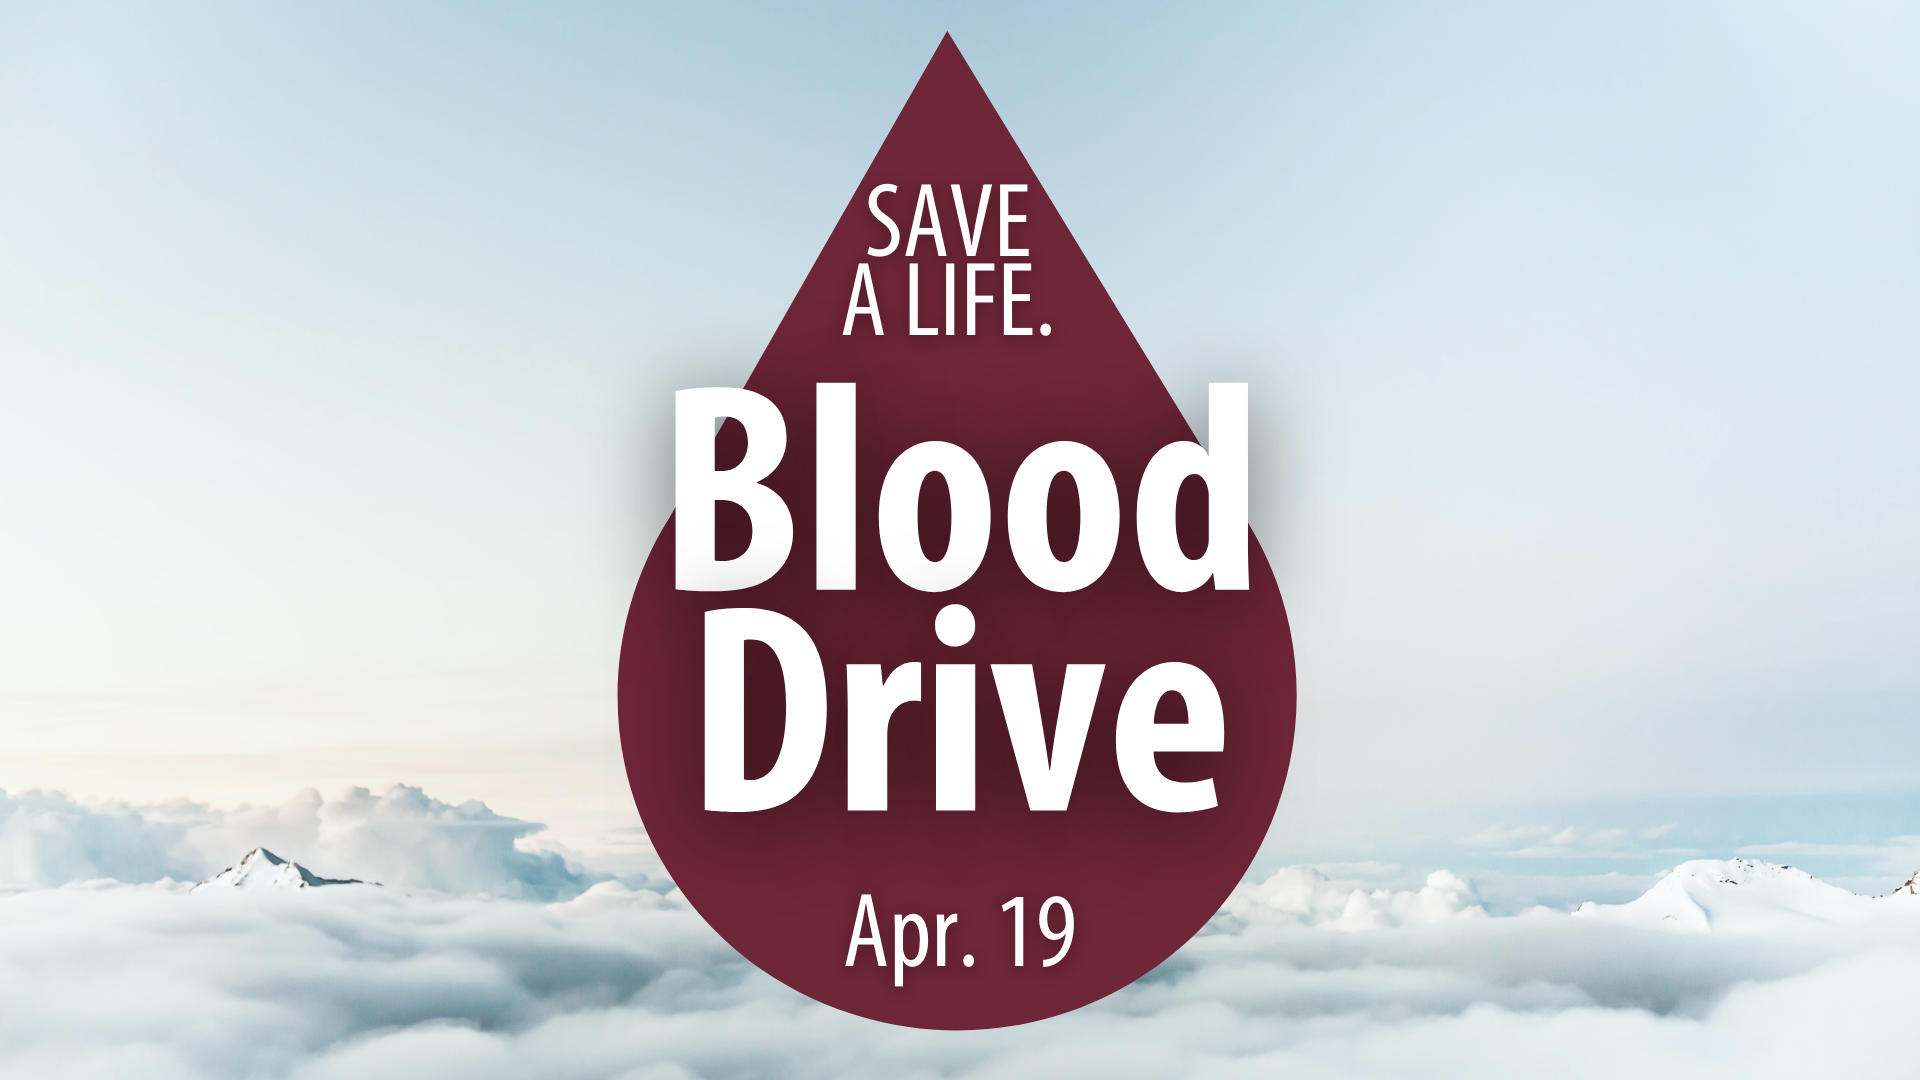 The UA Little Rock Staff Senate will hold a blood drive from 12:30-4 p.m. Monday, April 19, in the Fitness Center in the Donaghey Student Center.